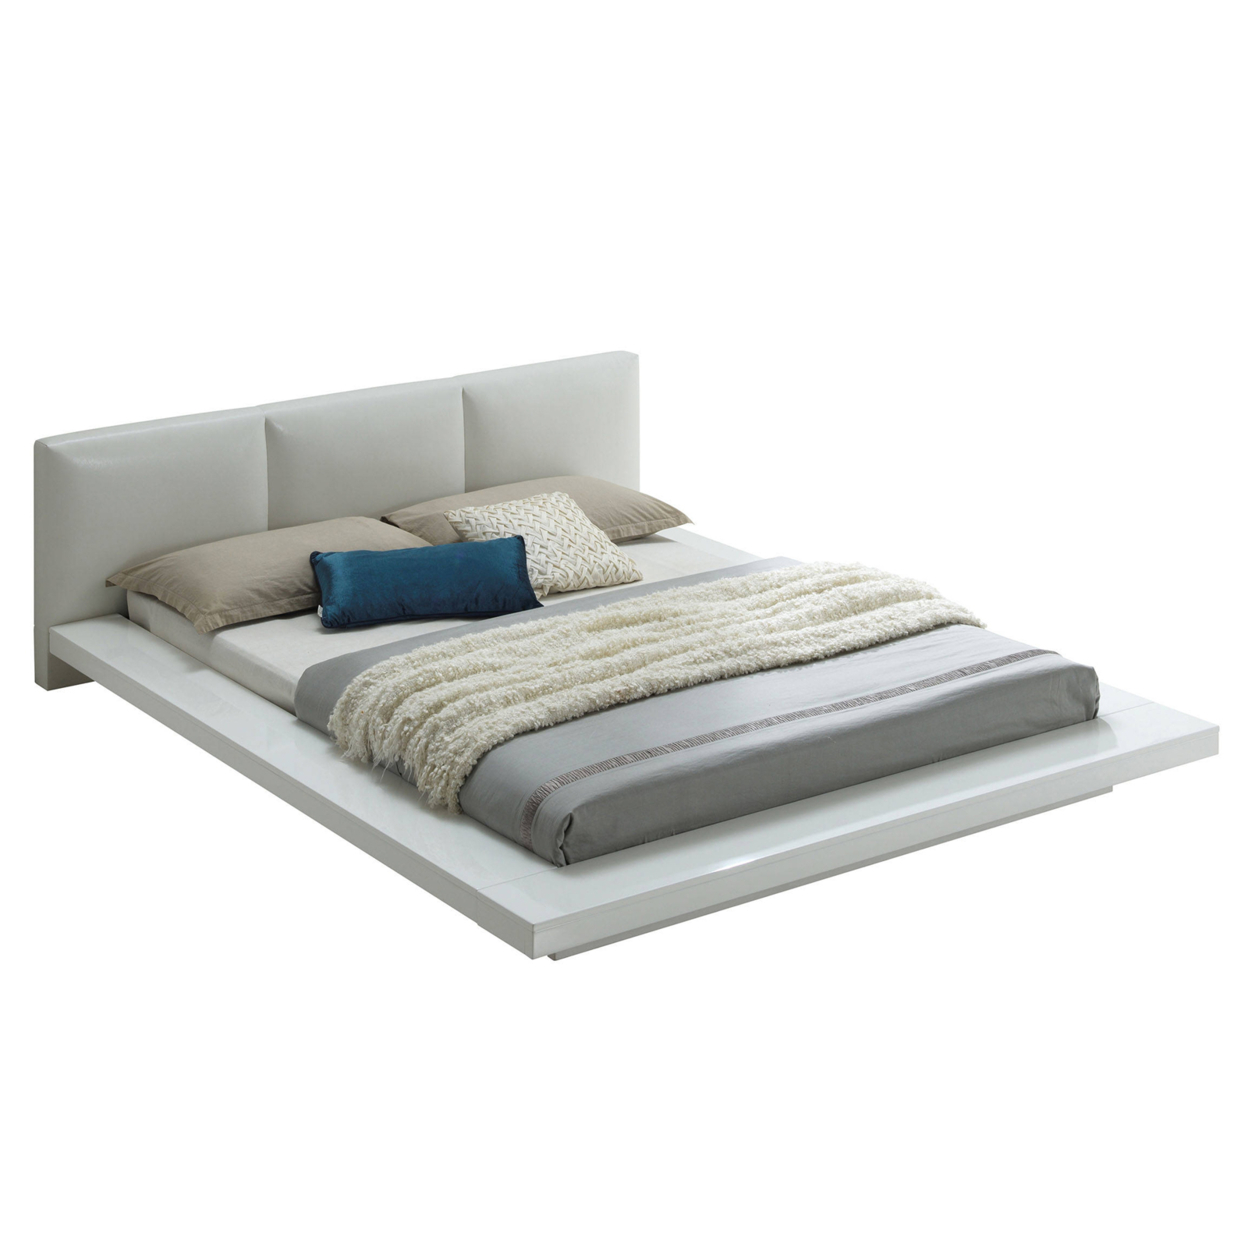 Wooden Queen Size Low Profile Bed With Padded Headboard, White- Saltoro Sherpi